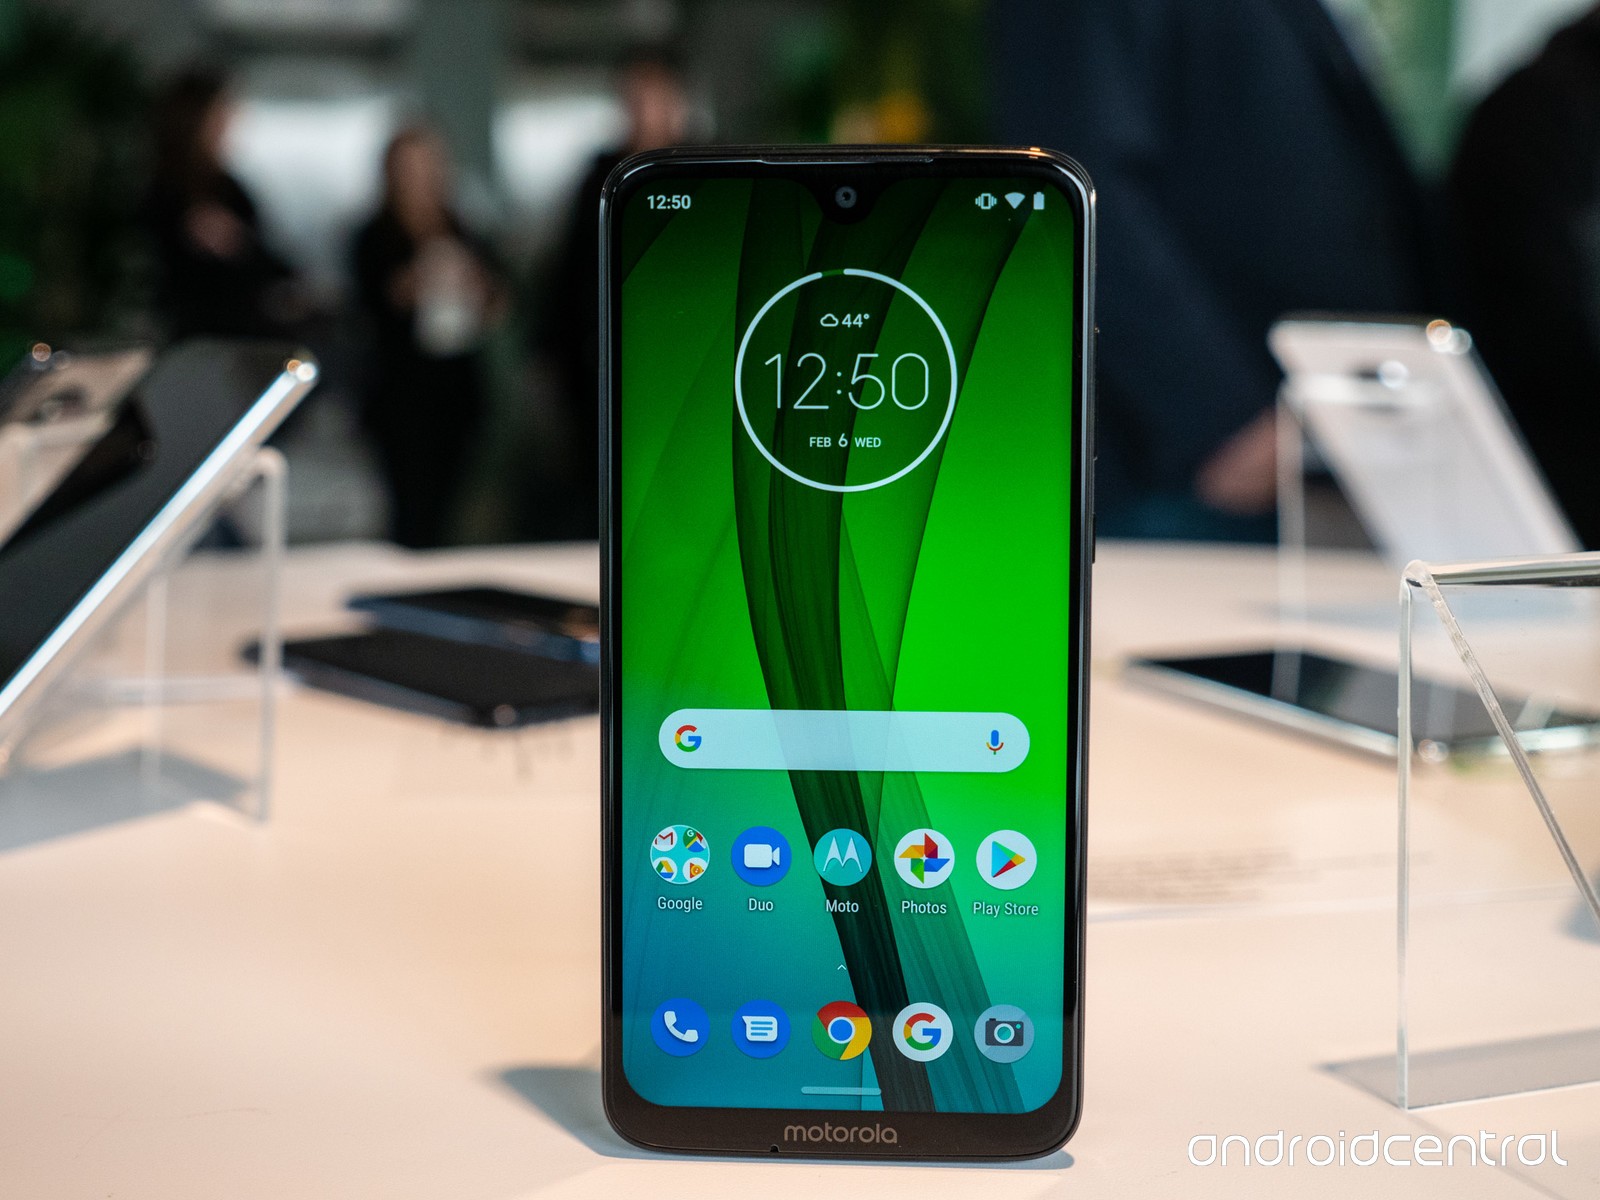 how to root moto g7 without pc and install twrp recovery step by step guide unlock bootloader of motorola g series root moto g7 supersu